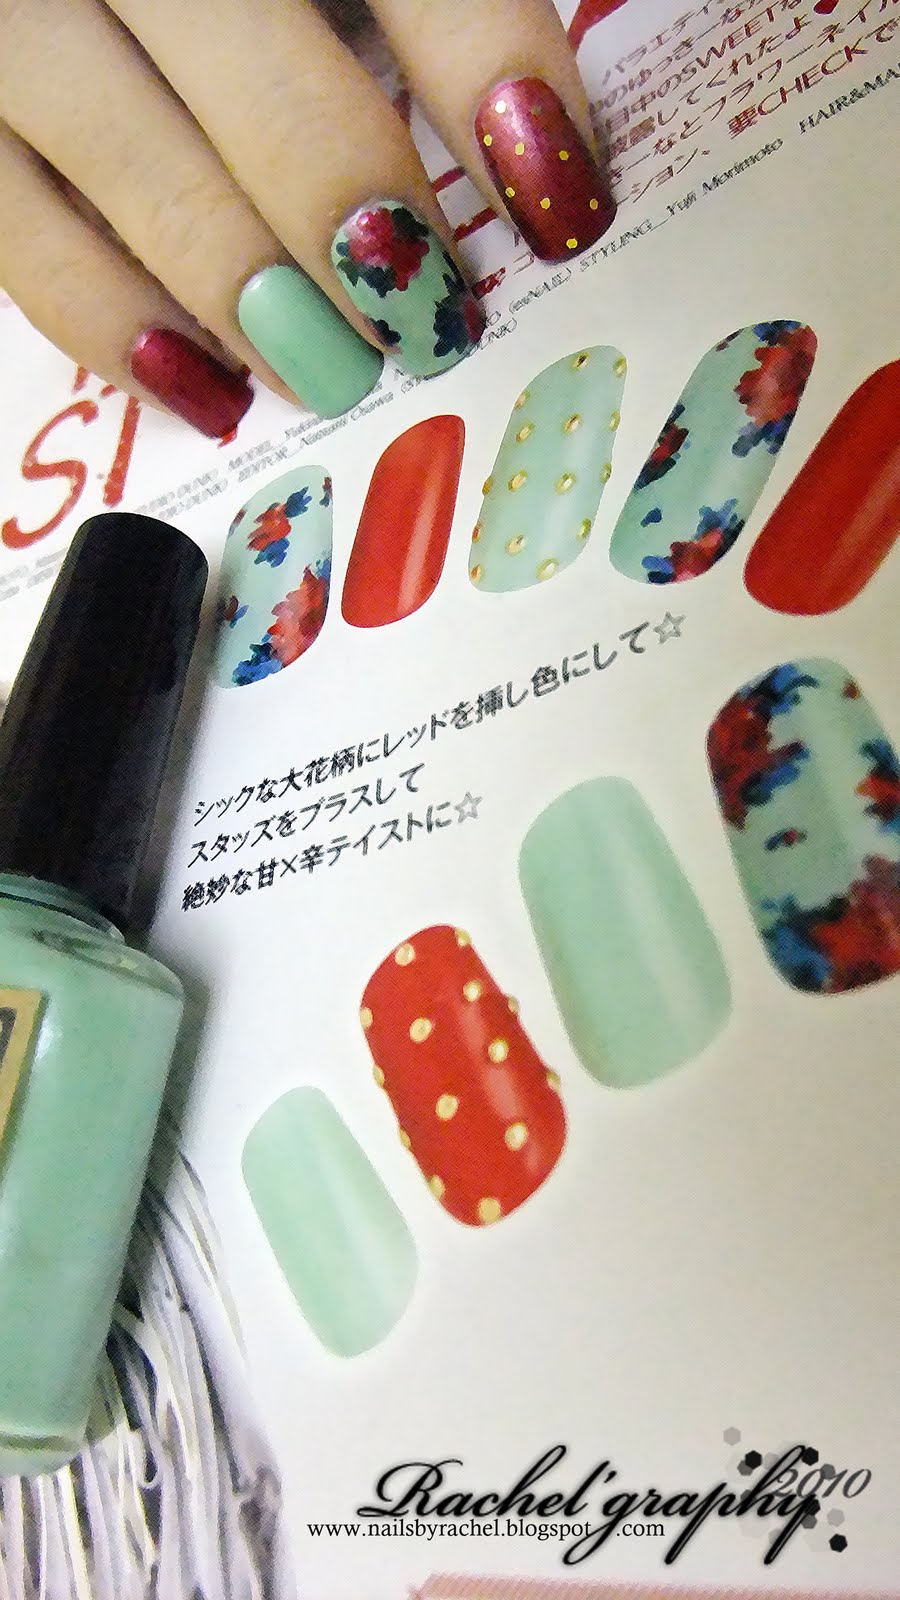 I got myself Nail Up July copy~^^ went to town nearby 2 days ago and how can